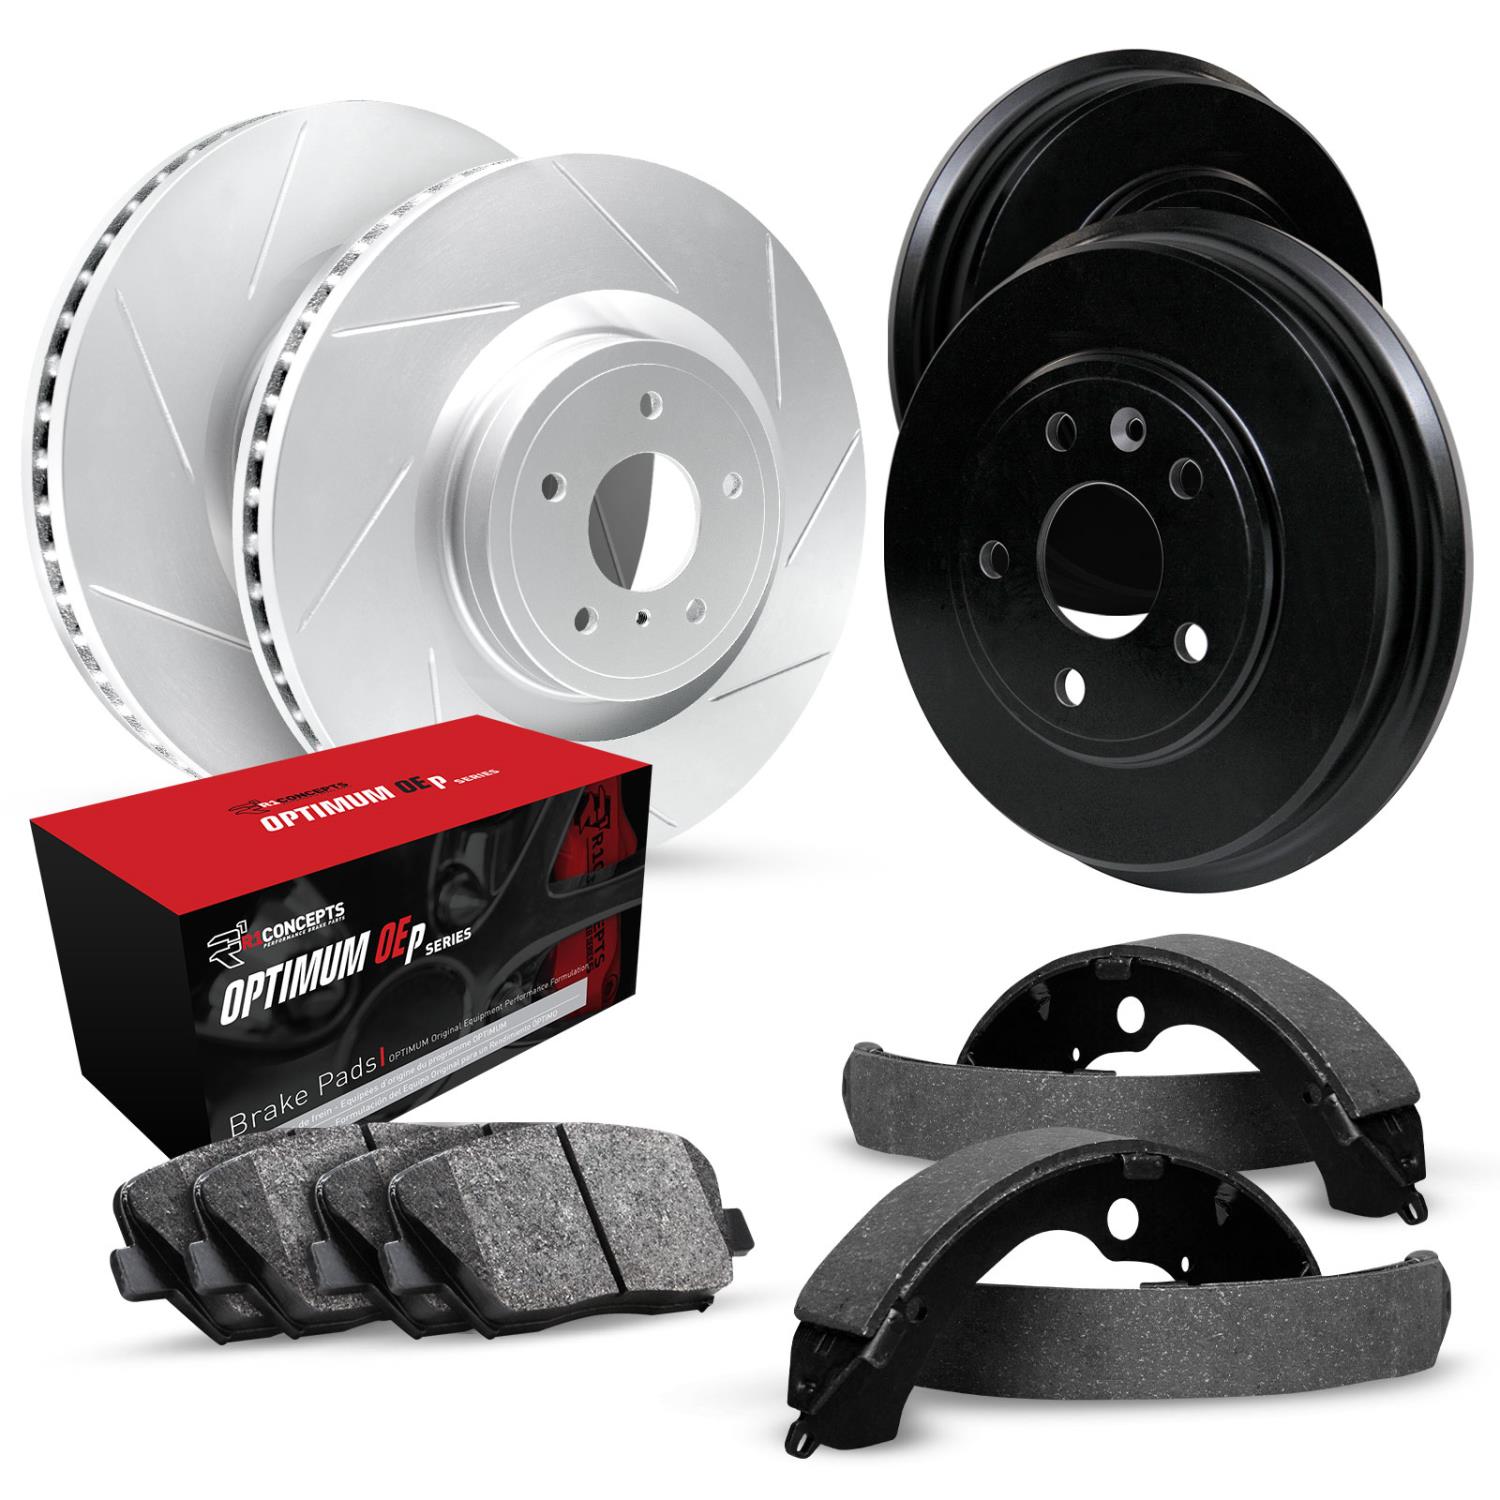 GEO-Carbon Slotted Brake Rotor & Drum Set w/Optimum OE Pads & Shoes, 2000-2008 GM, Position: Front & Rear